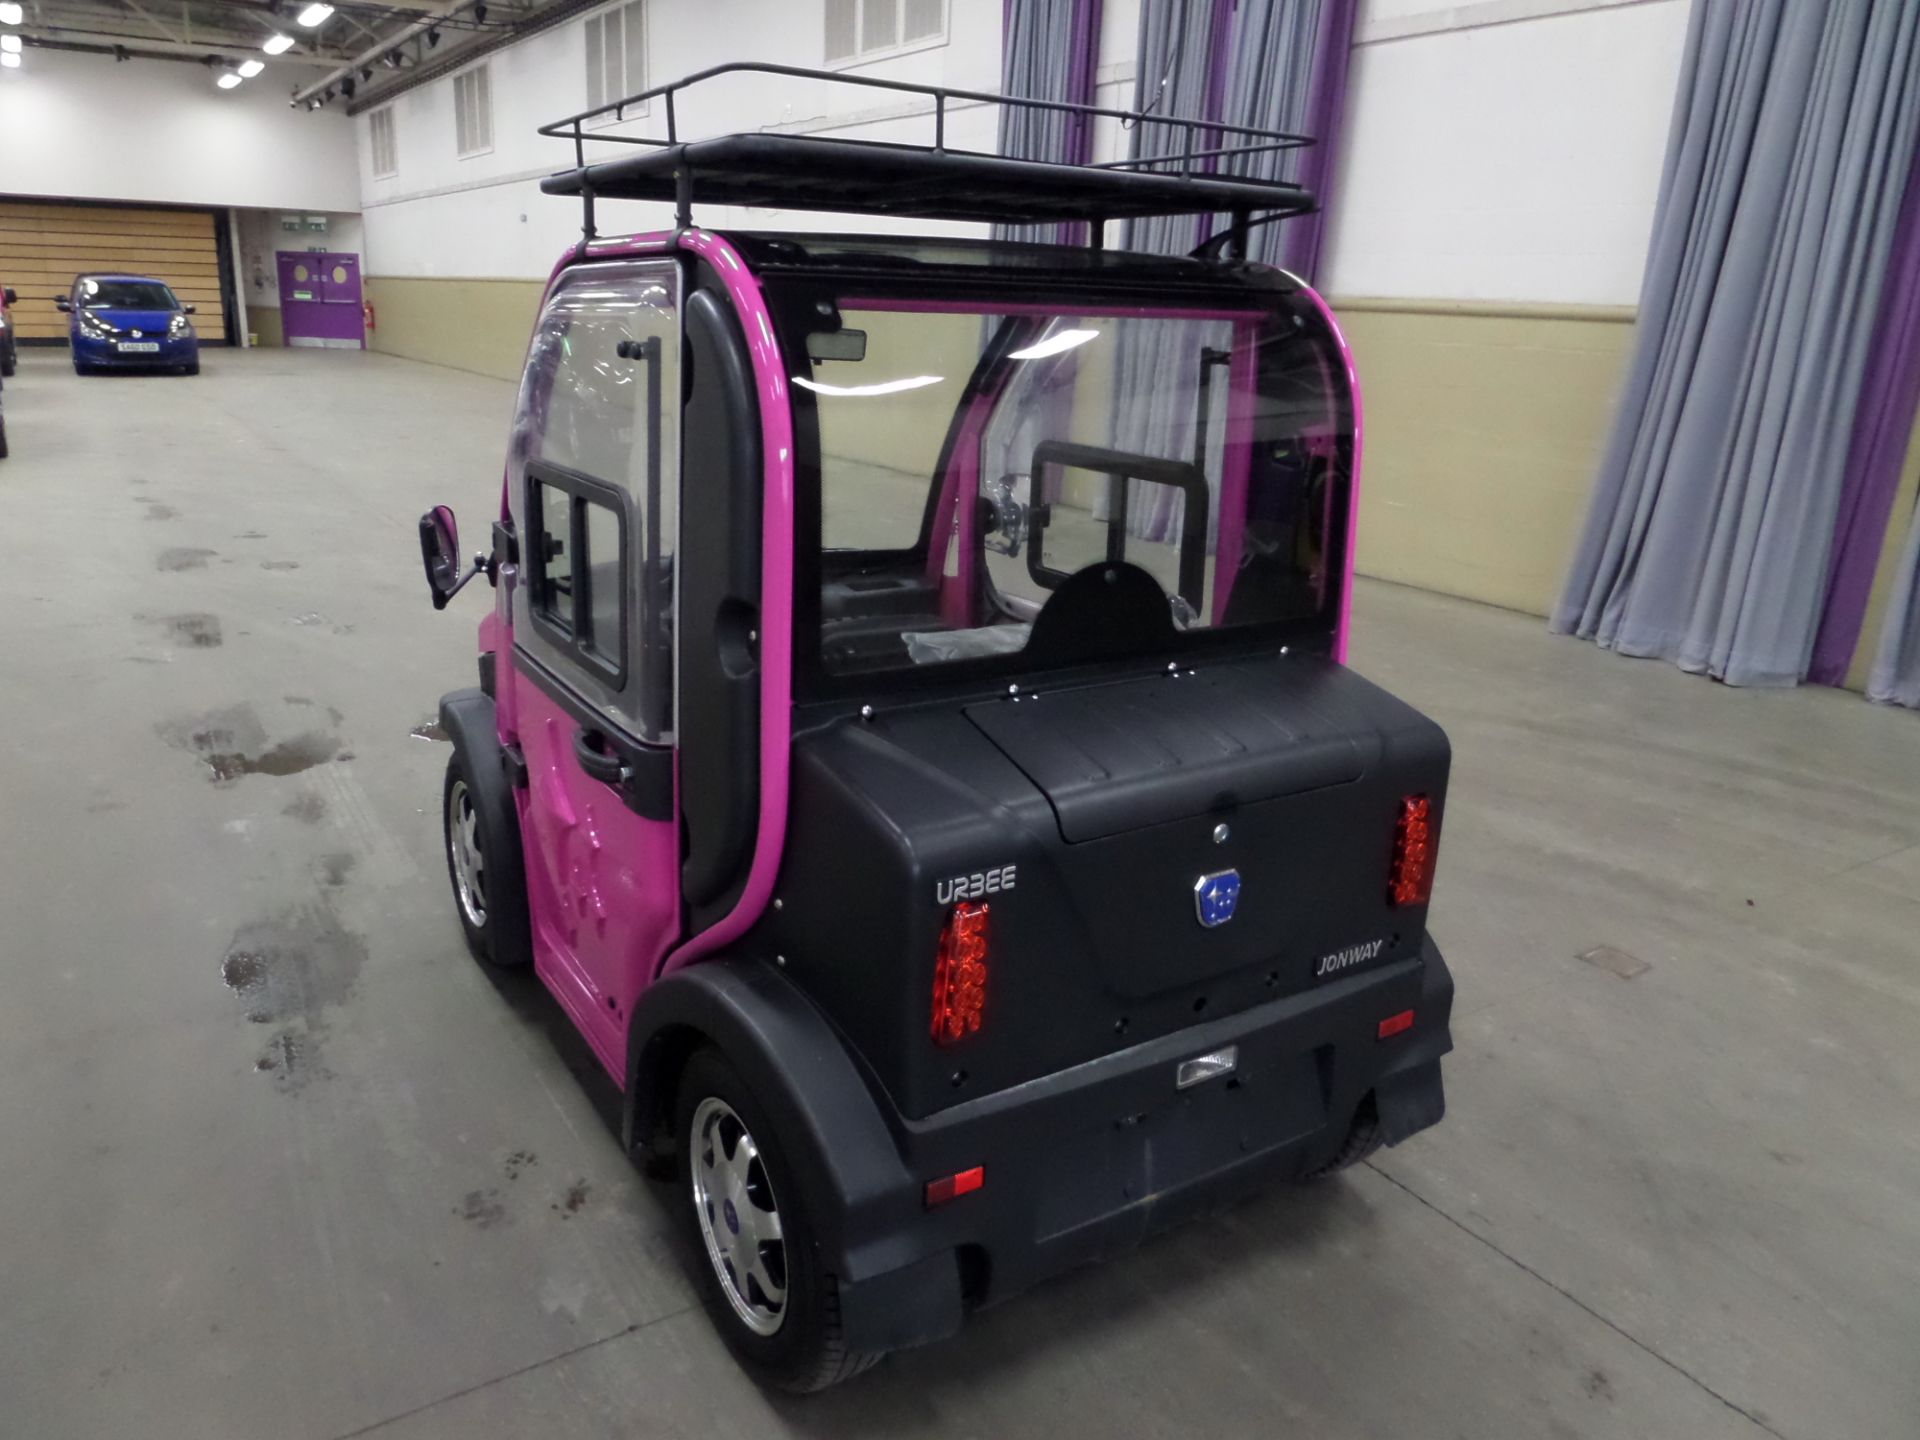 Jonway Urbee Electric Car, Brand new & unused. Type Approved August 2014 - Image 3 of 7